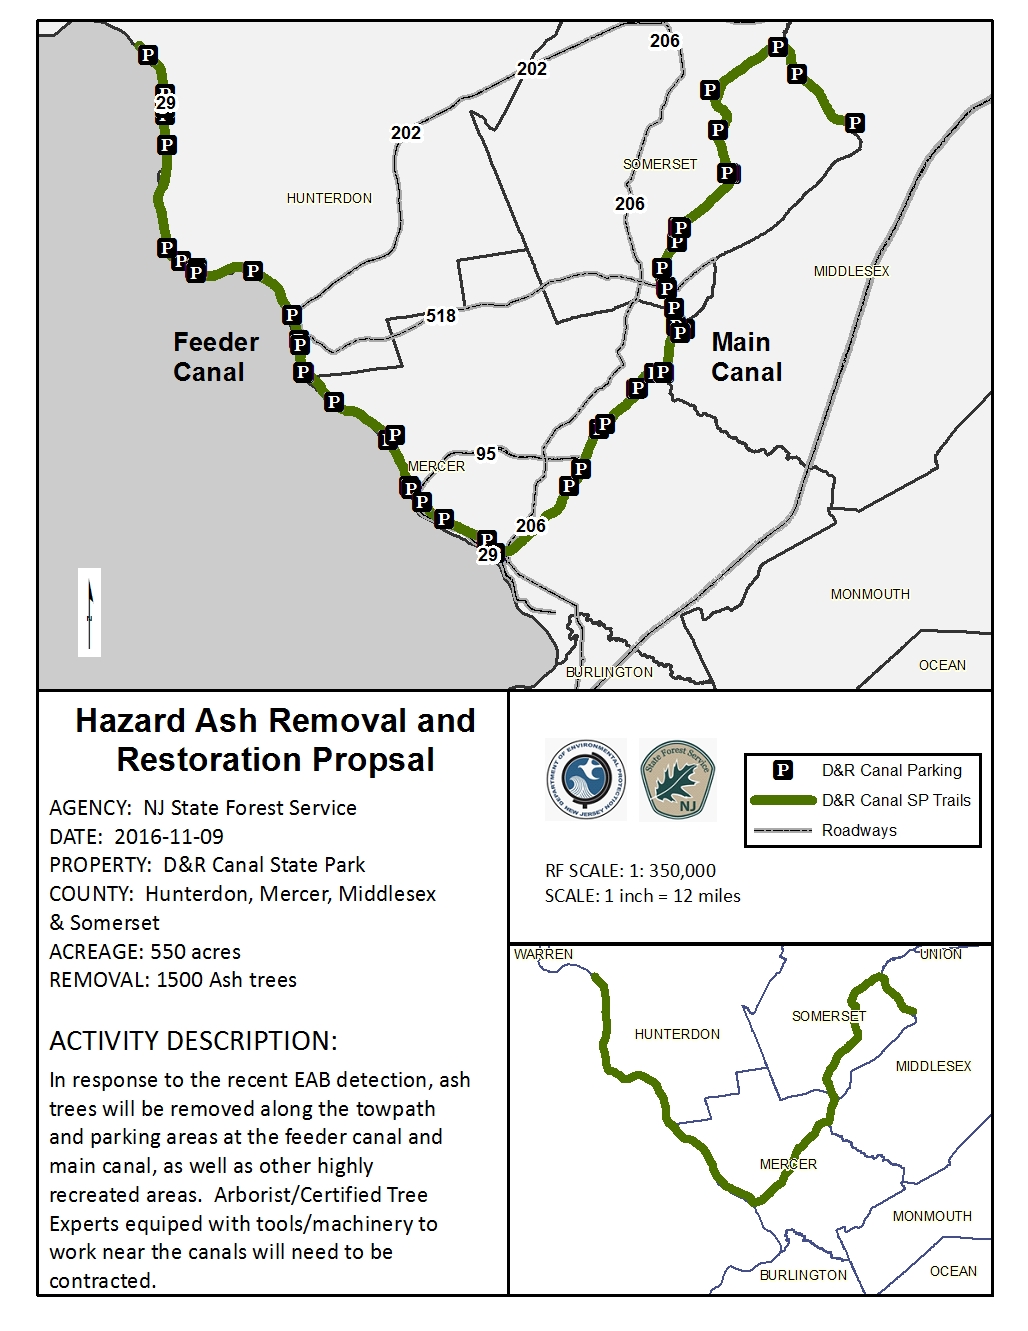 Hazard Ash Removal and Restoration Map